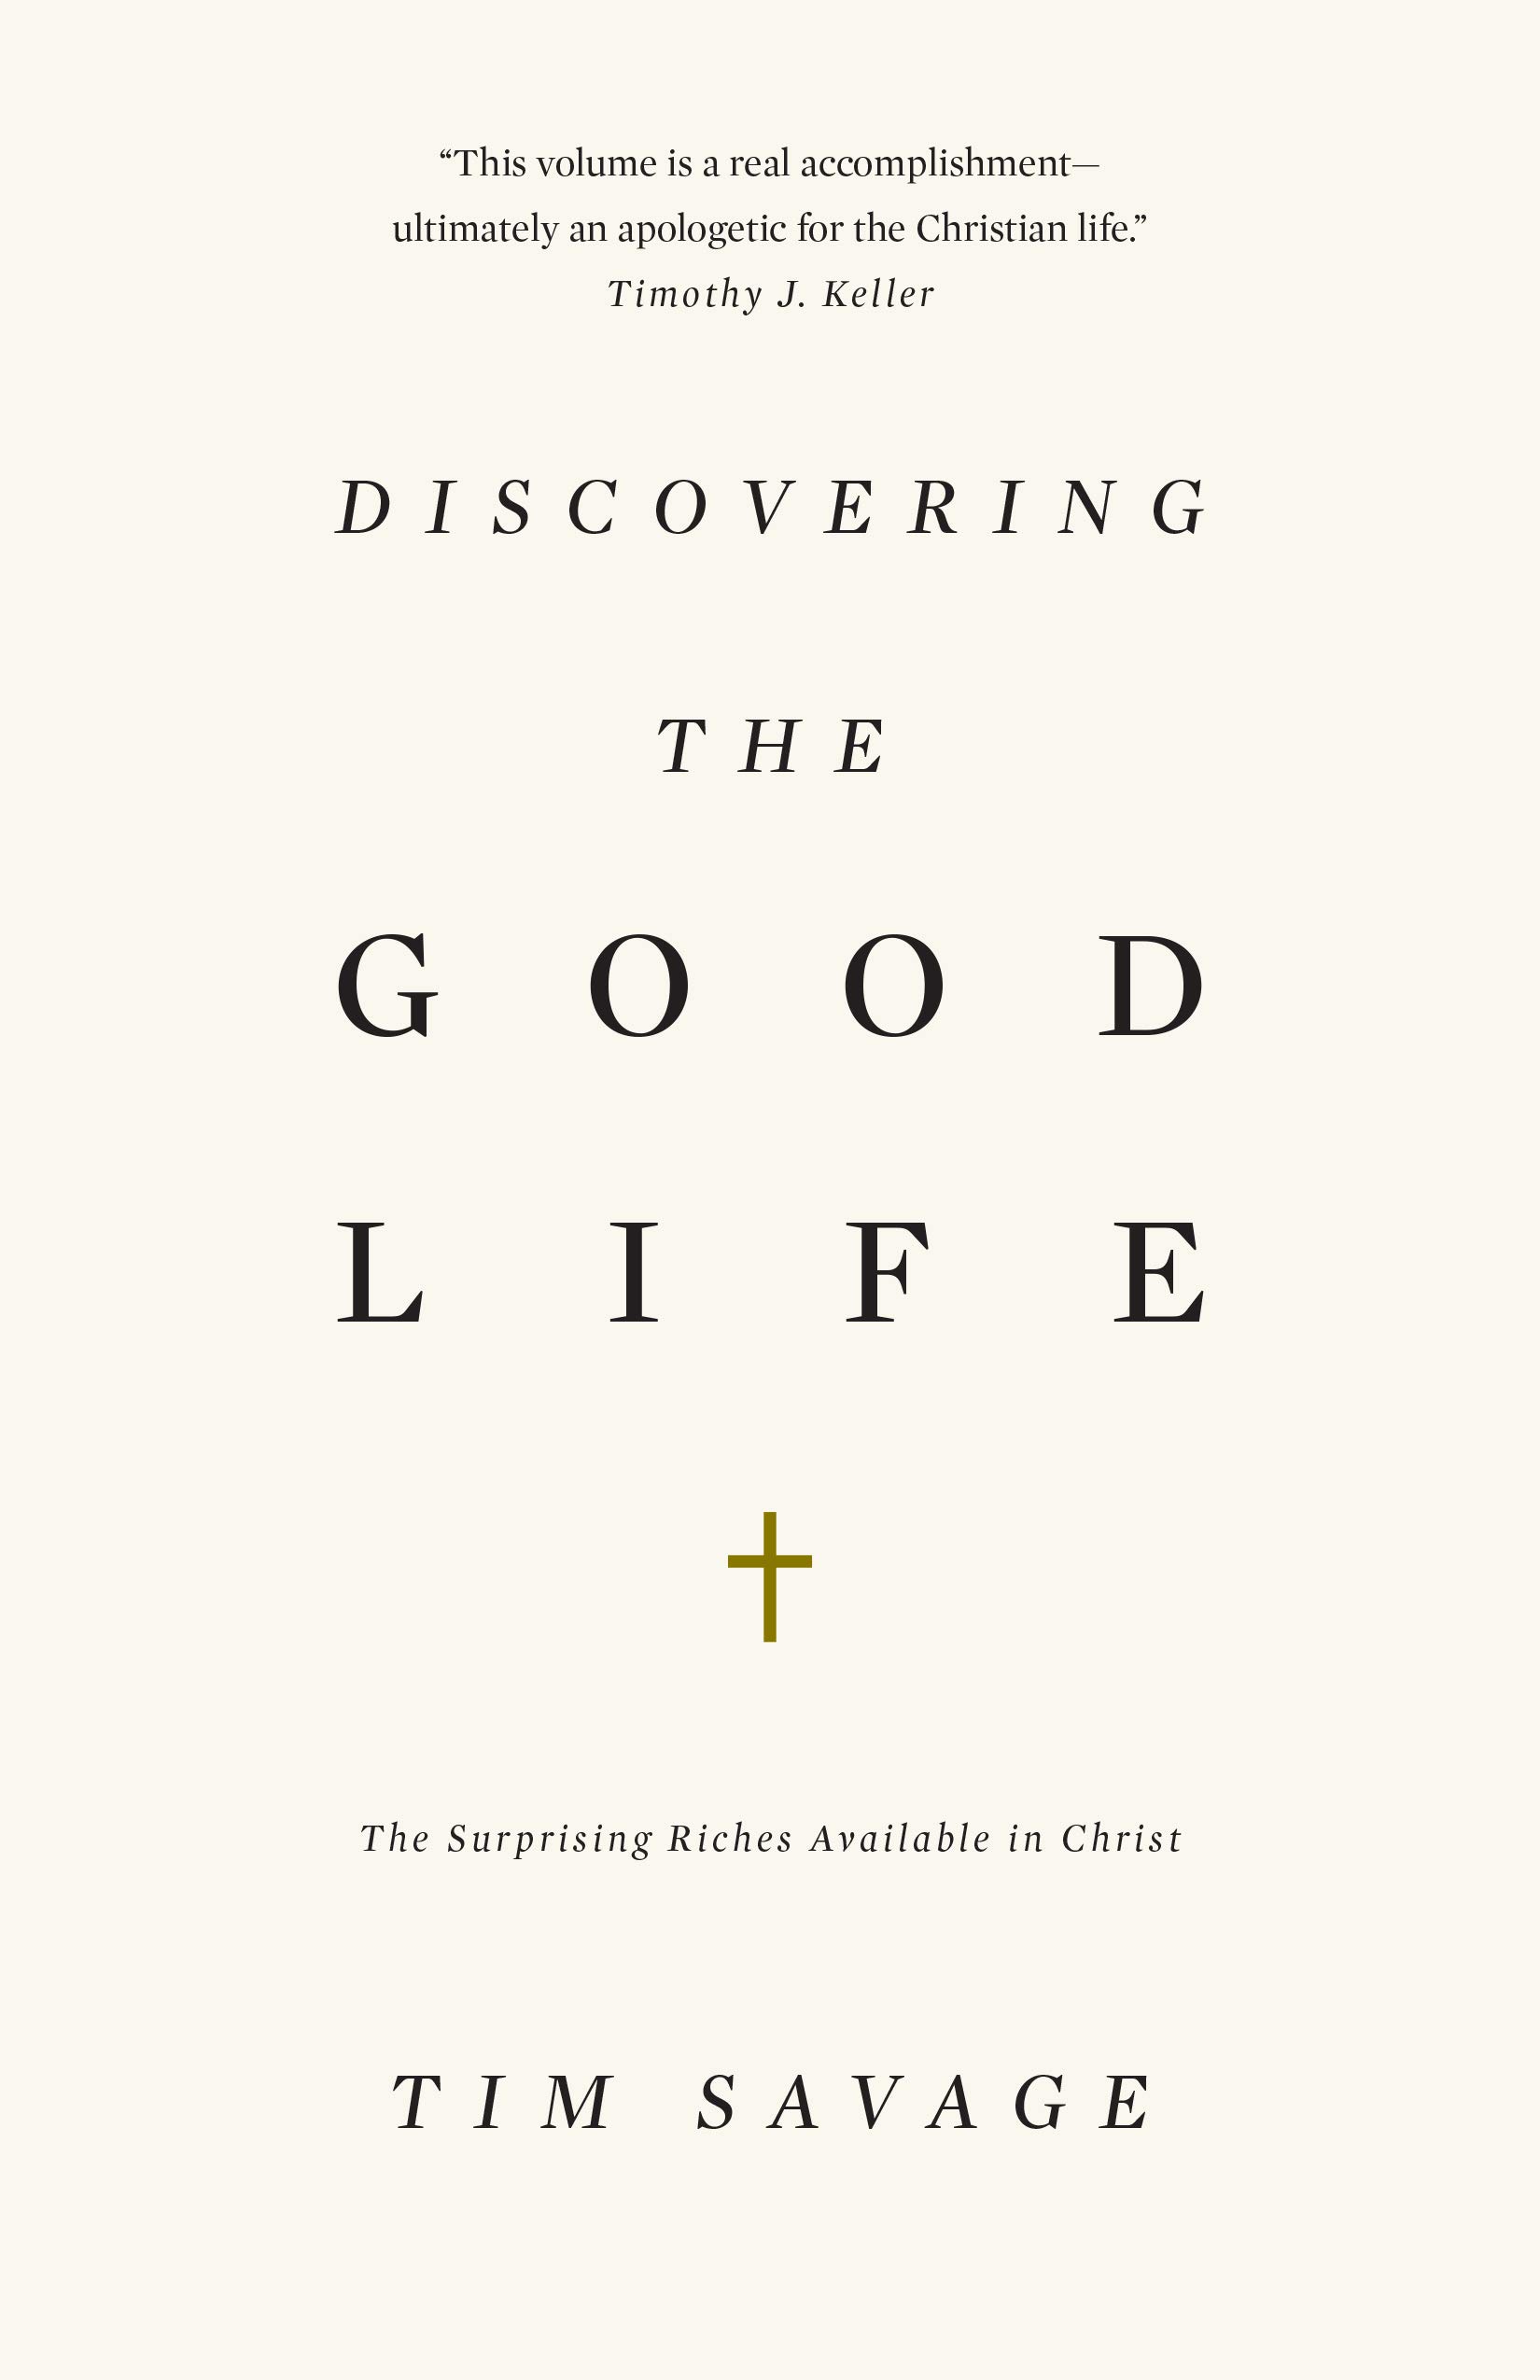 Book Notice: DISCOVERING THE GOOD LIFE: THE SURPRISING RICHES AVAILABLE IN CHRIST, by Tim Savage